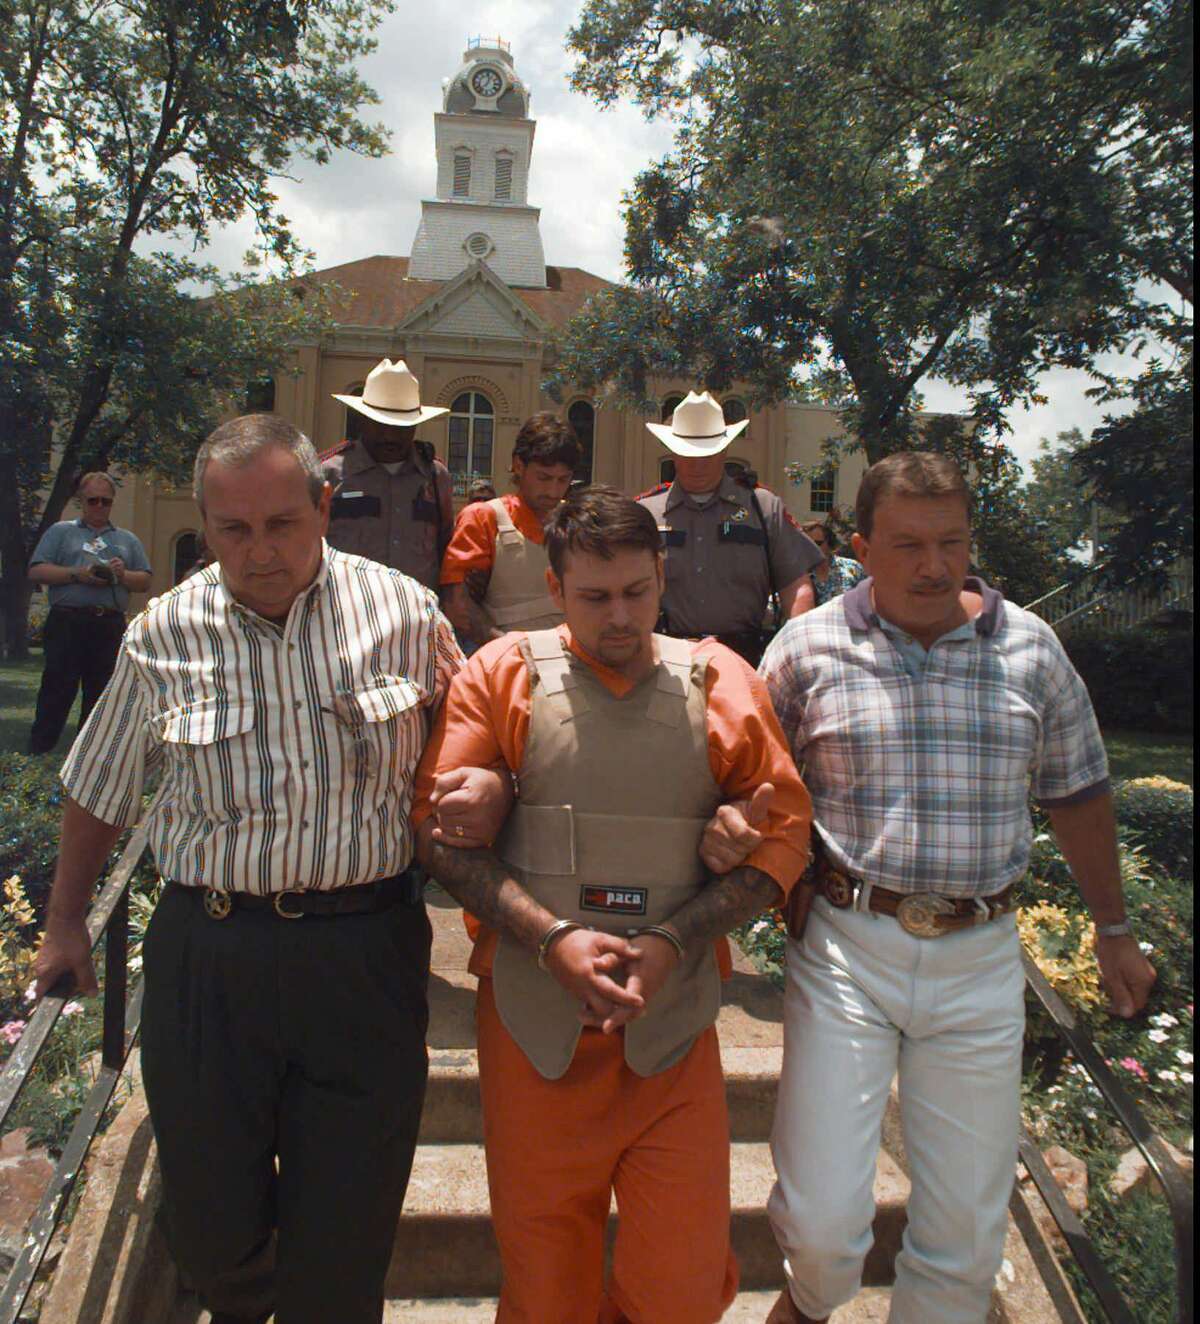 John William King, front, and Lawrence Russell Brewer are escorted from the Jasper County courthouse Tuesday, June 9, 1998, in Jasper, Texas. King, Brewer and Shawn Allen Berry are charged with first degree murder in the death of James Byrd Jr. Byrd's was tied to a truck and dragged to his death along a rural East Texas road. (AP Photo/David J. Phillip)